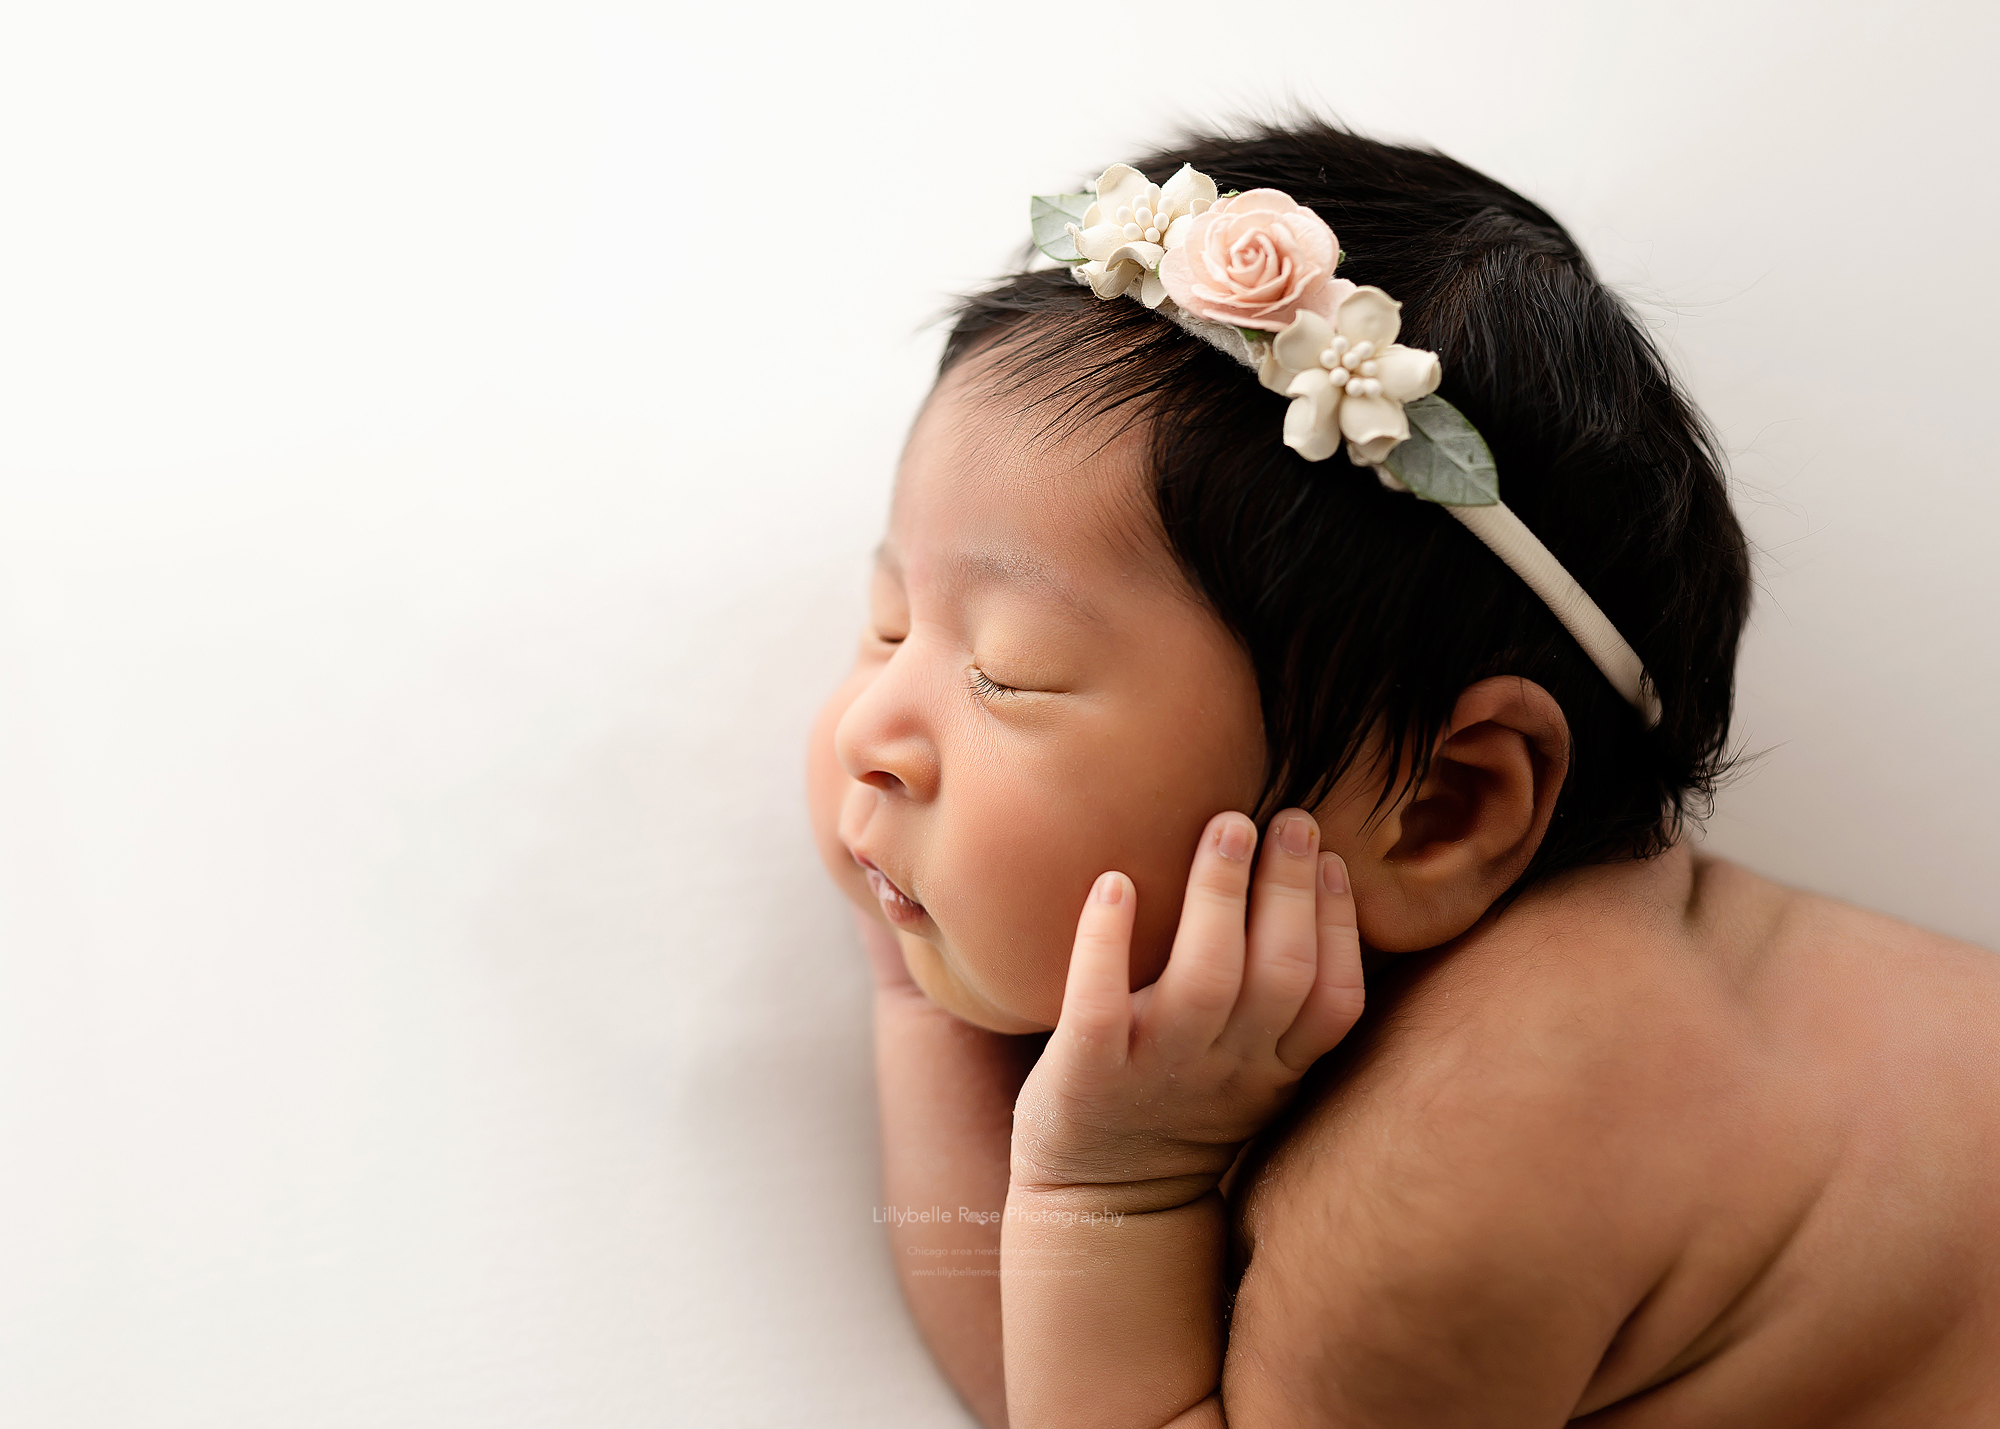 chicago baby pictures, how to calm a newborn, chicago newborn photography, chicago newborn photographer, best newborn photographer, newborn pictures near me, baby pictures near me, Naperville baby pictures, Naperville photographer, chicago photographer